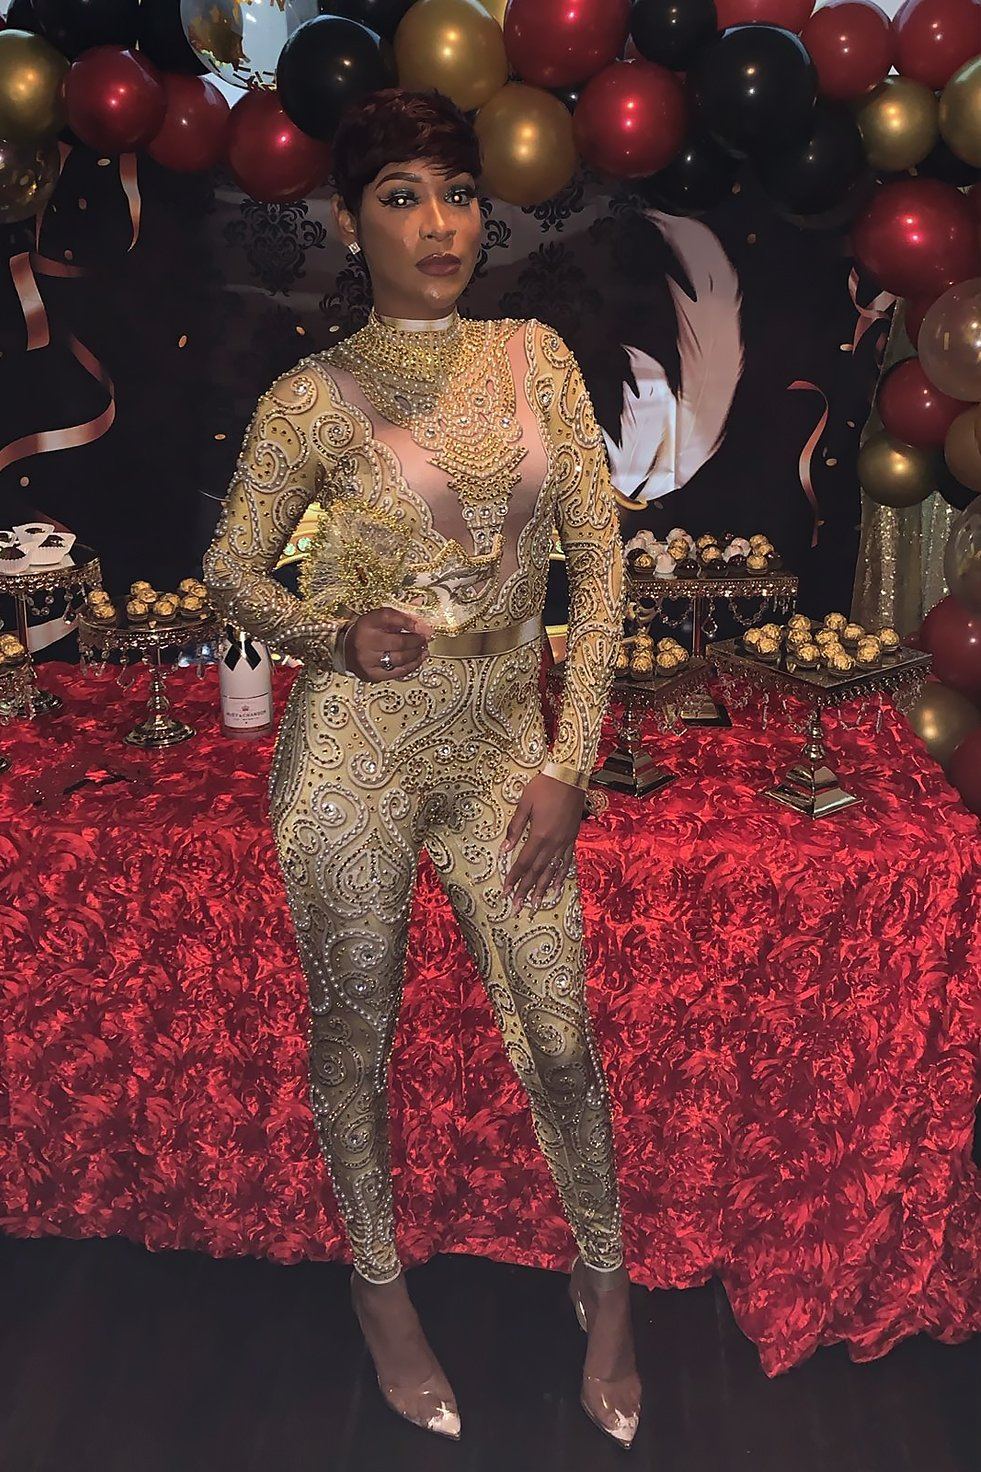 Anything You Want Gold Diamante Bodysuit (Ready To Ship)